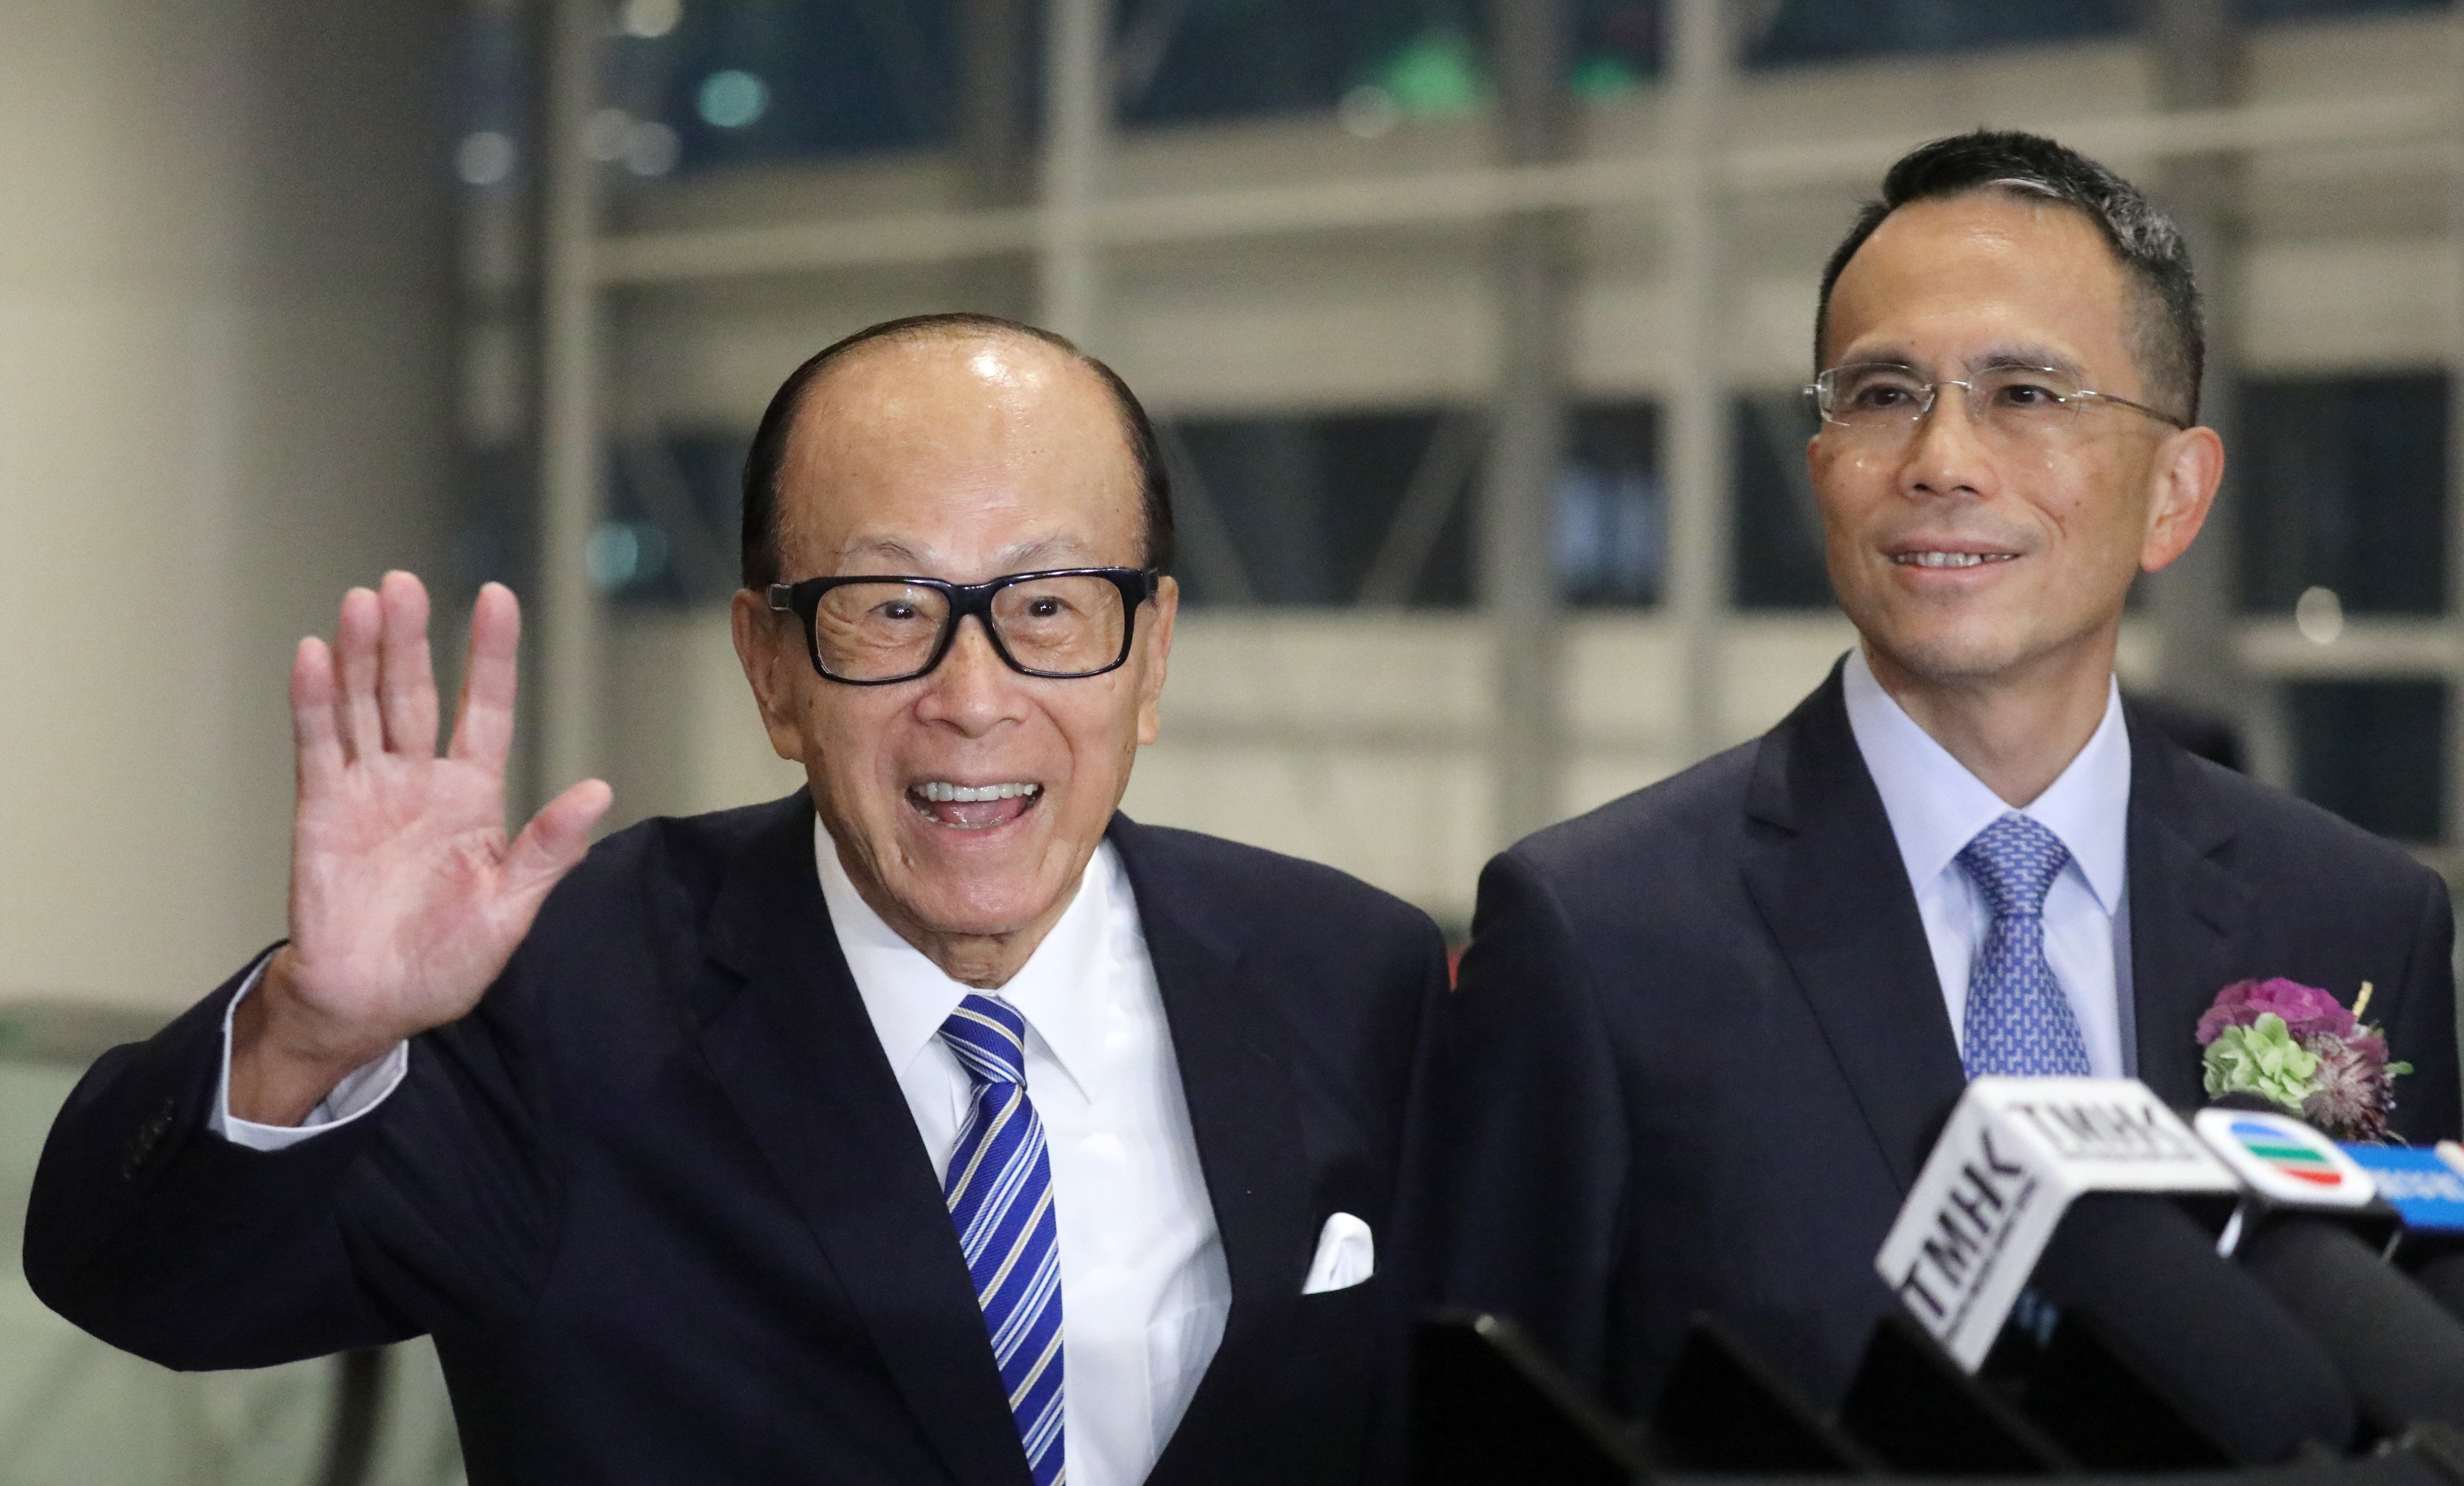 Tycoon Li Ka-shing (left) with his elder son Victor Li Tzar-kuoi (right) during the annual dinner of CK Asset Holdings in Wan Chai before the elder magnate’s retirement, on 10 January 2020. Photo: Dickson Lee